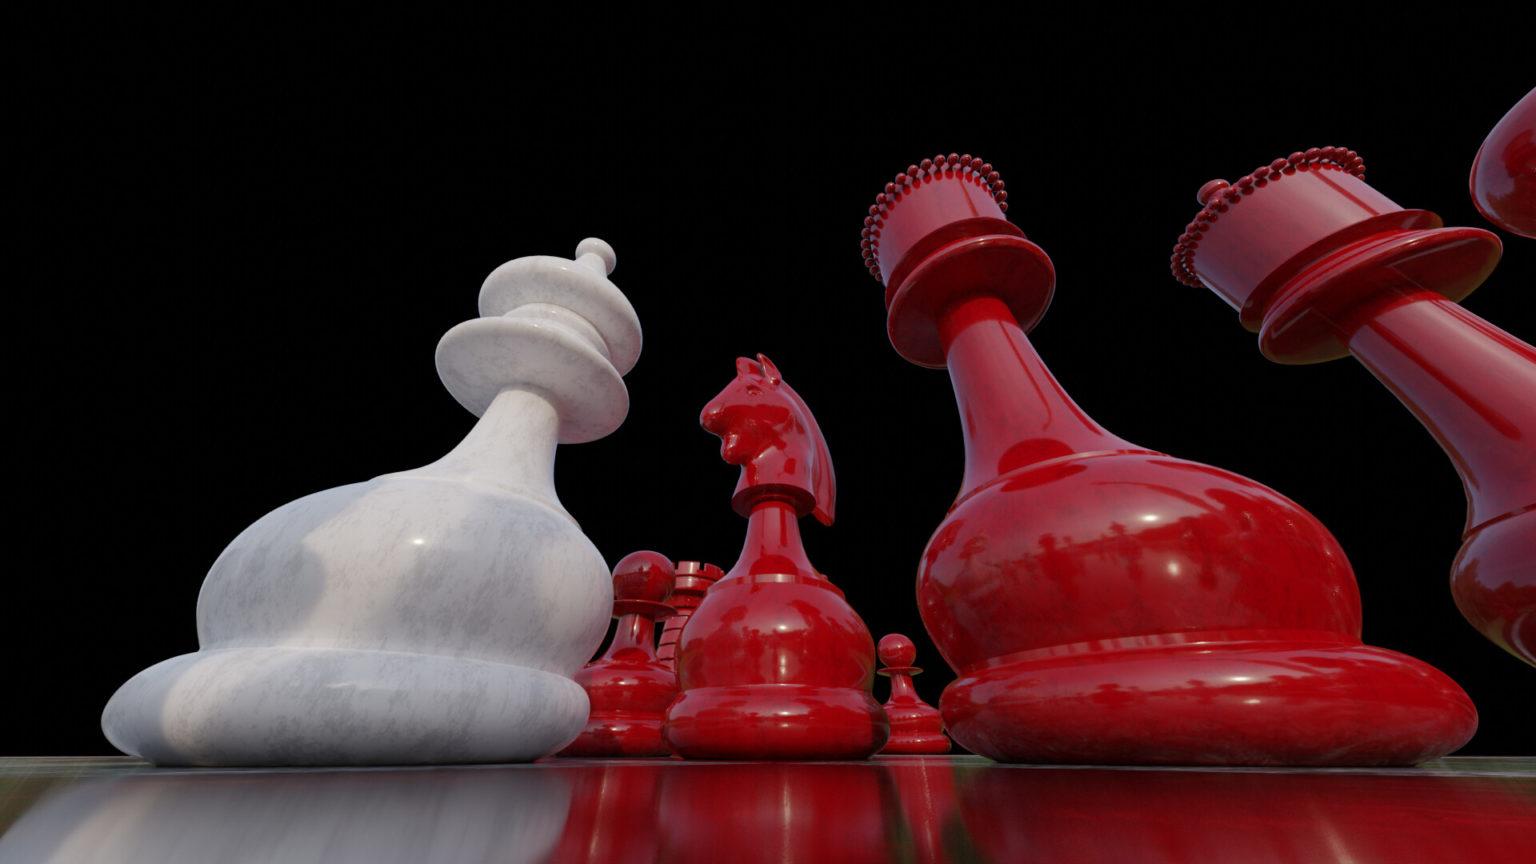 Chess Set - Looking Up